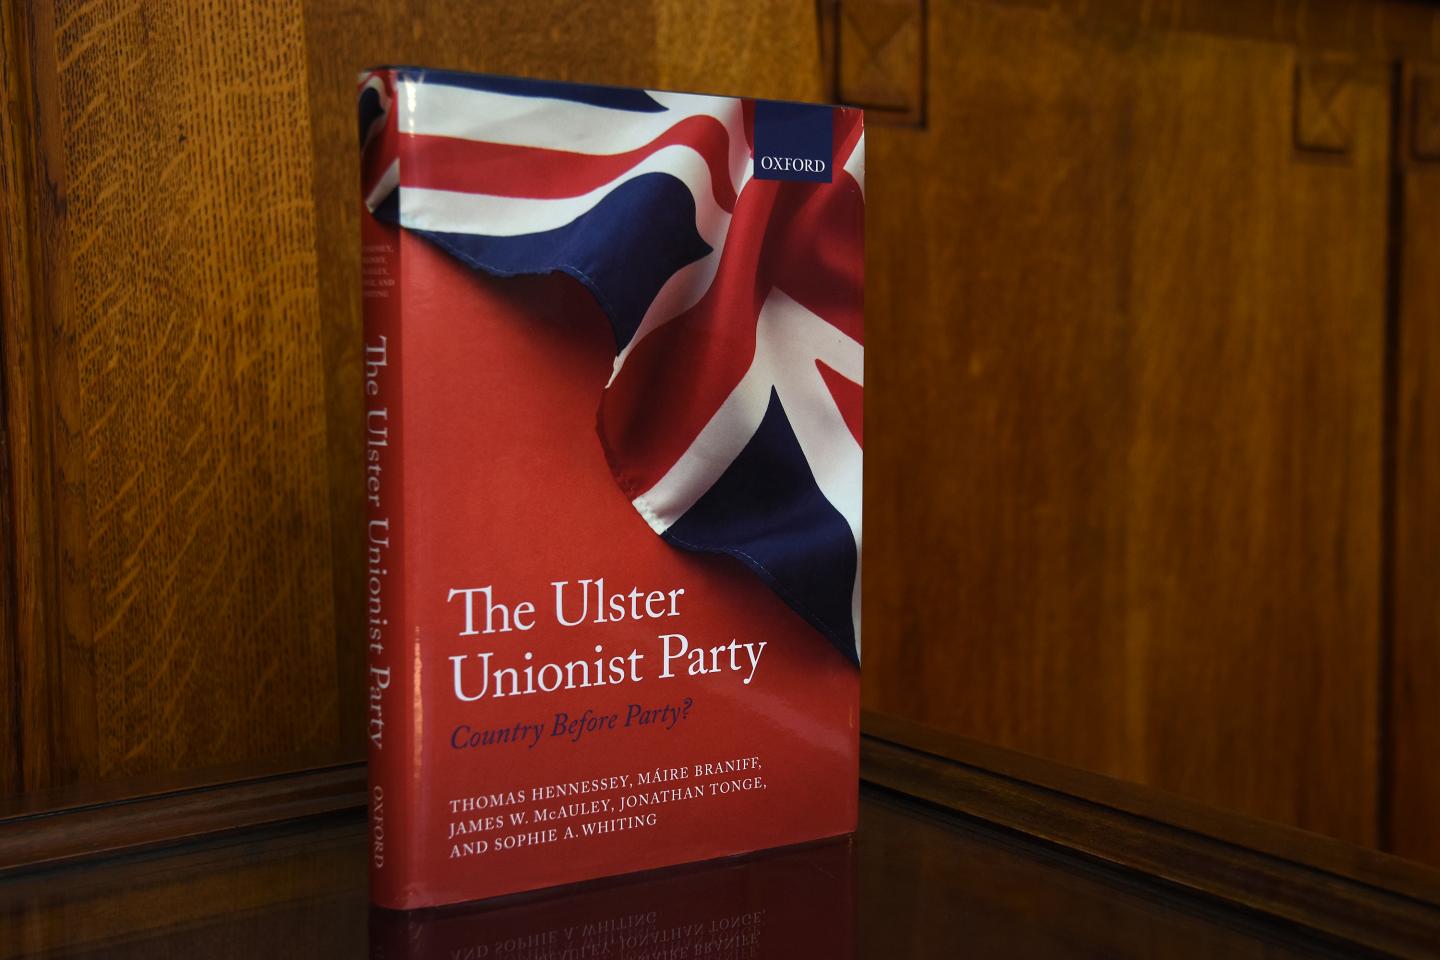 'The Ulster Unionist Party -- Country before Party?''